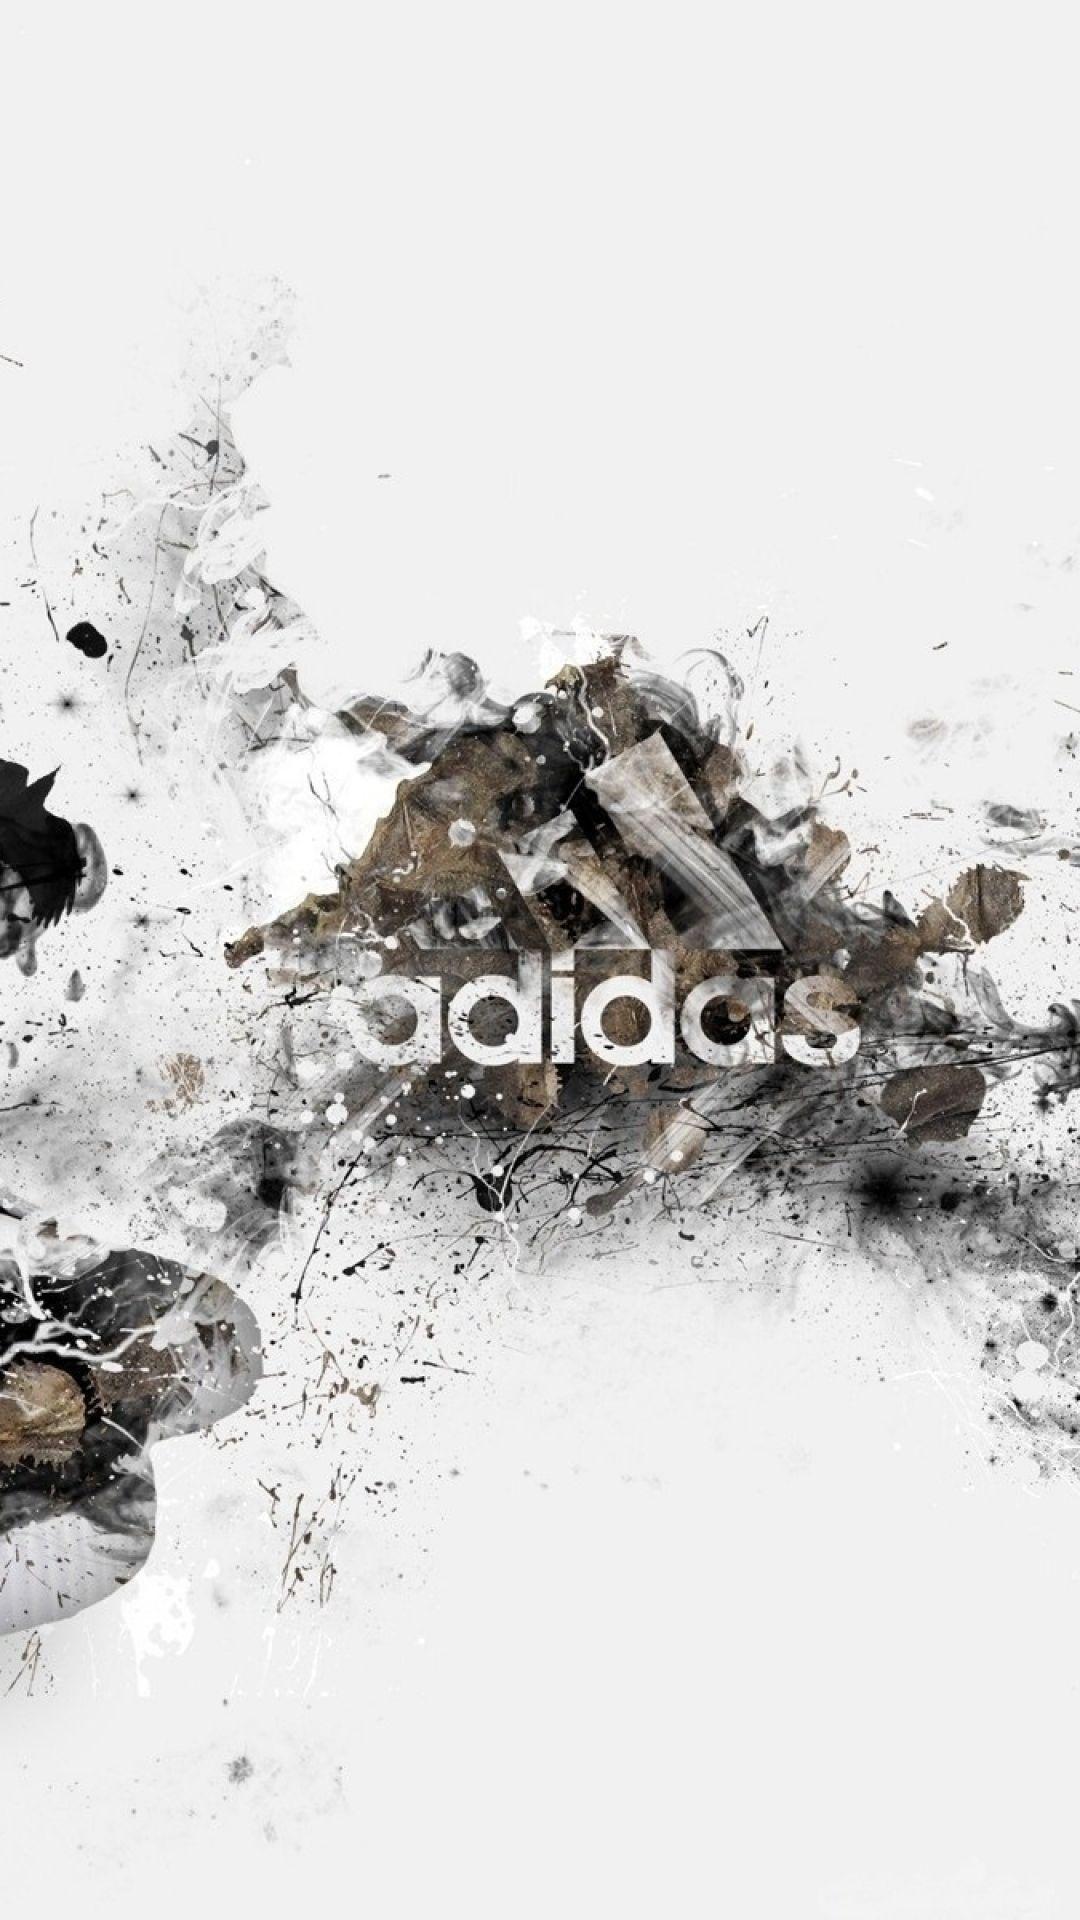 Download Wallpapers 1080x1920 Adidas, Sneakers, Stylish, Brand Sony